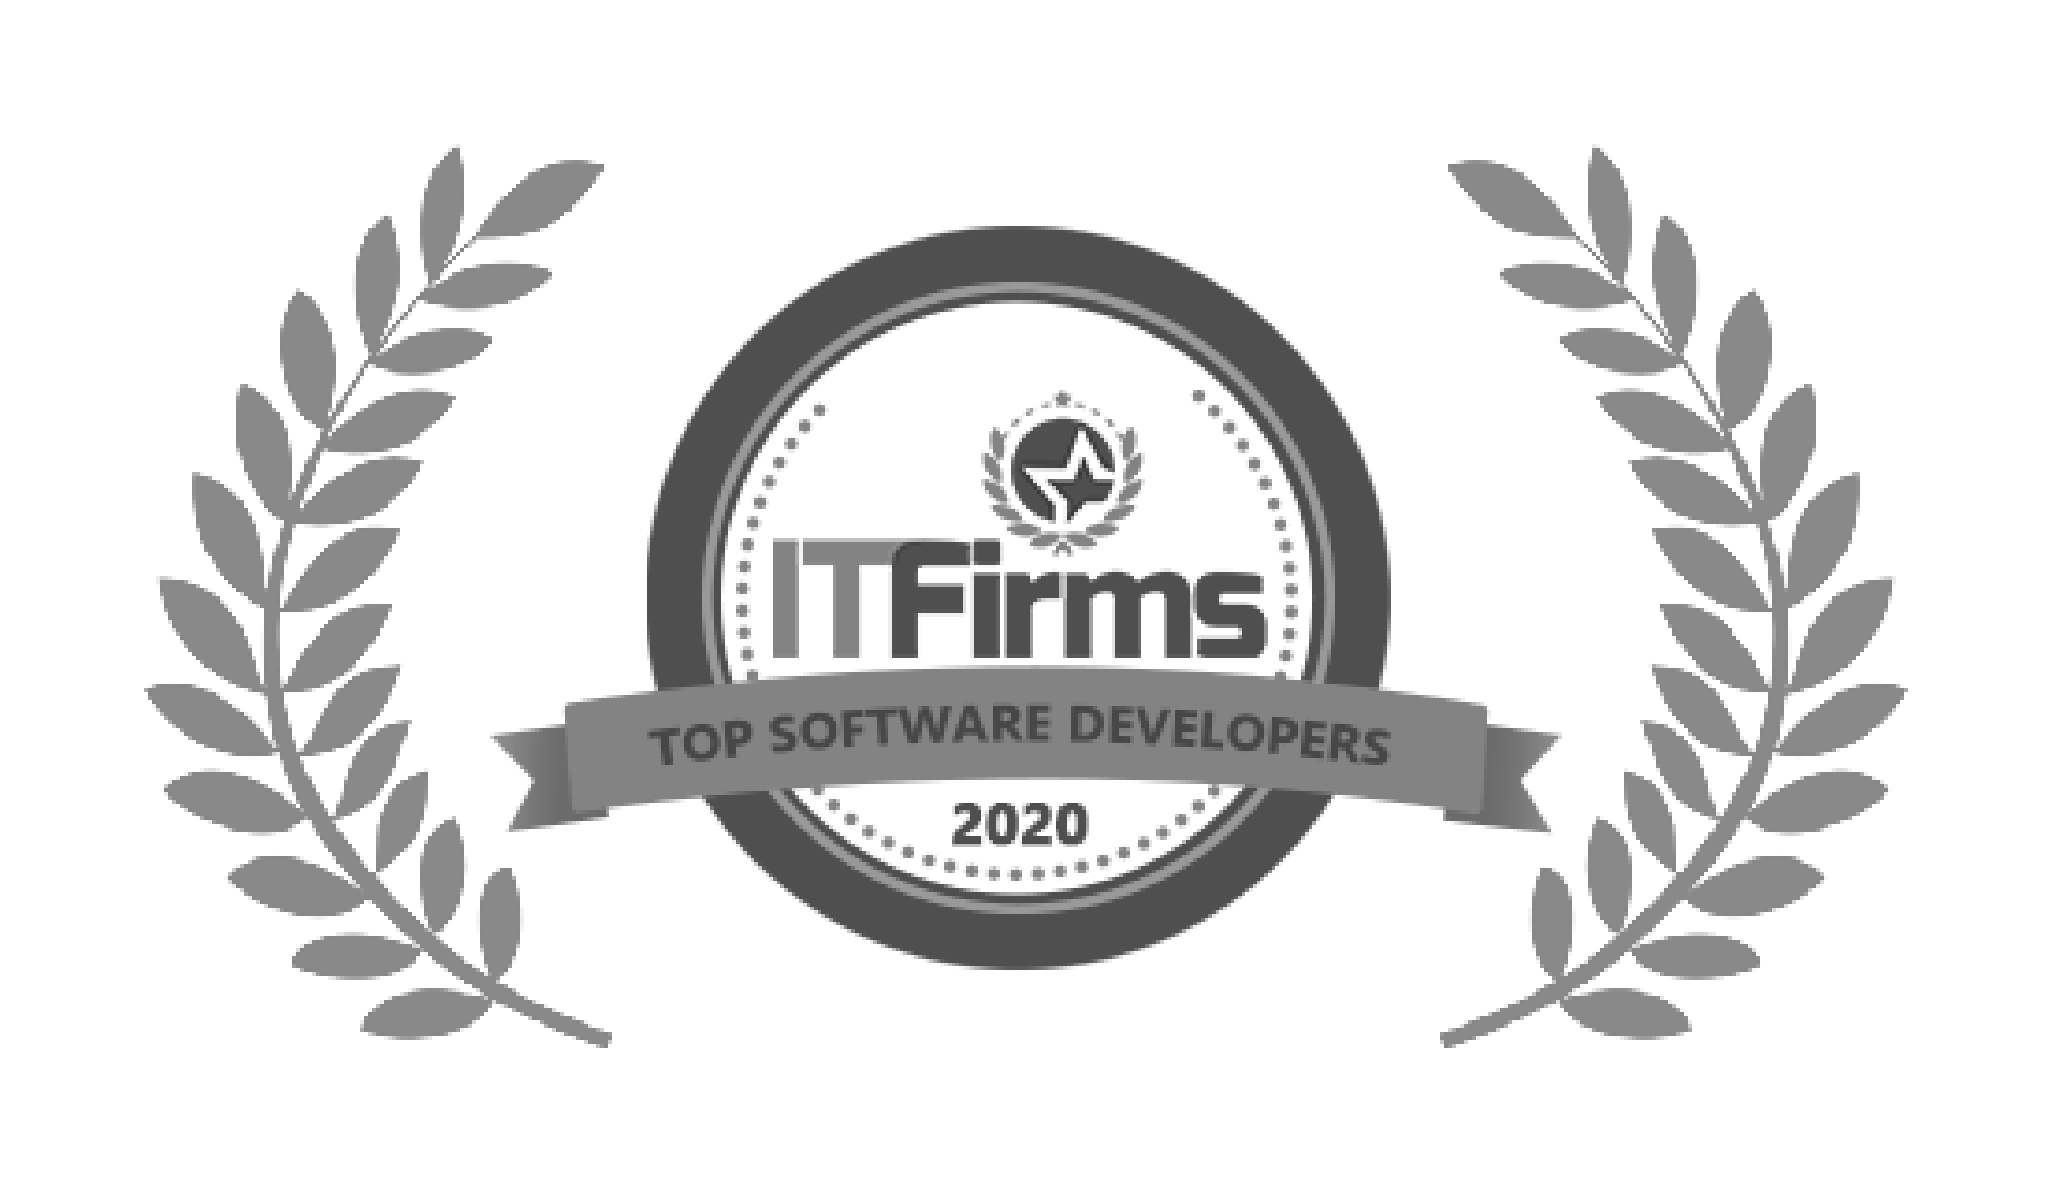 Sifars named Top Software Developers 2020, IT Firms